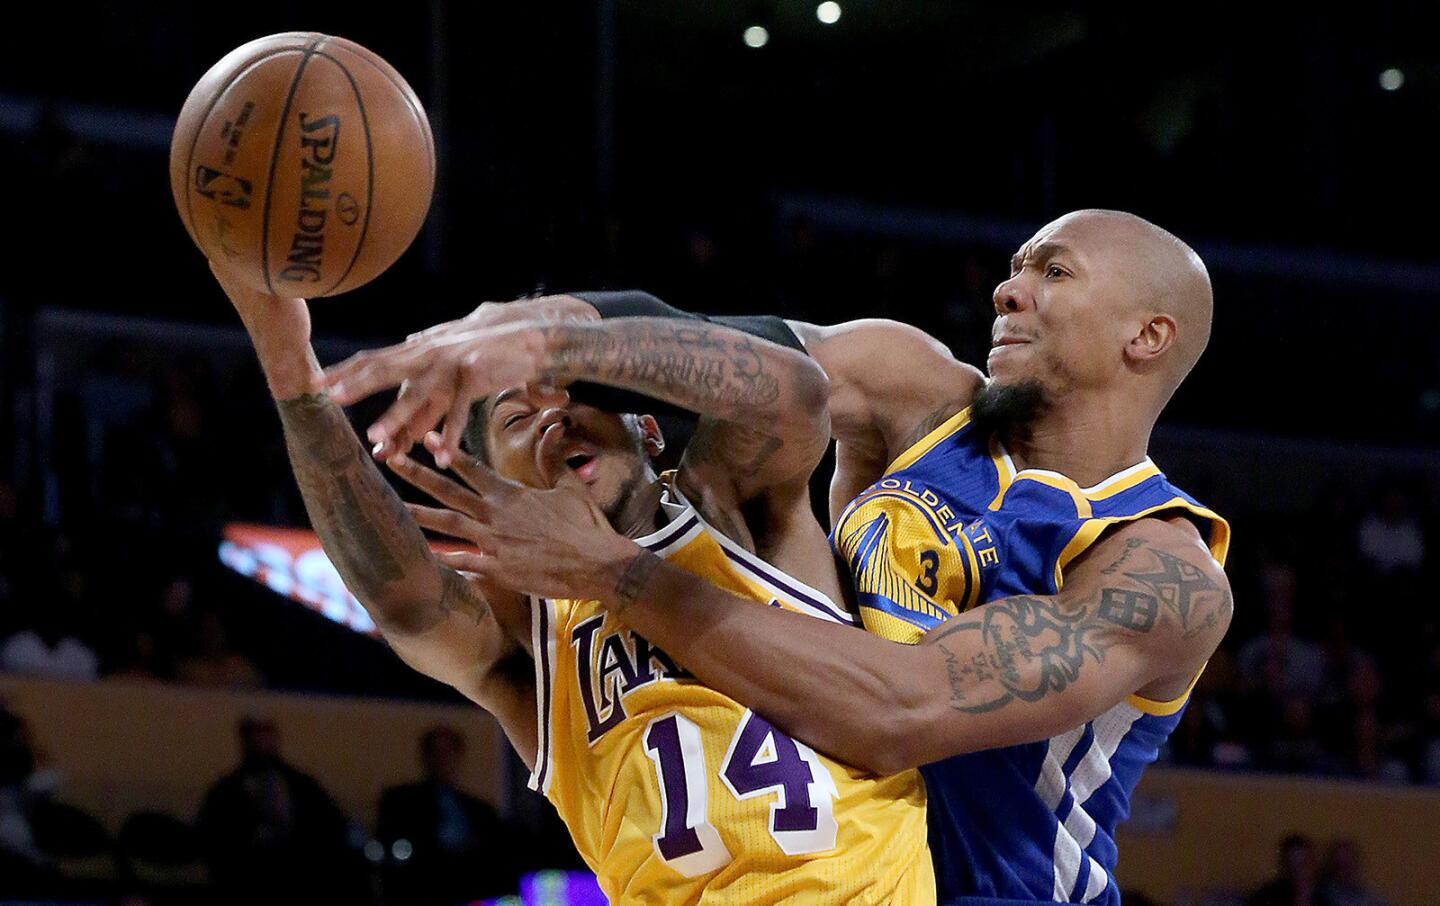 Lakers forward Brandon Ingram takes hard foul by Warriors forward David West in the first quarter.